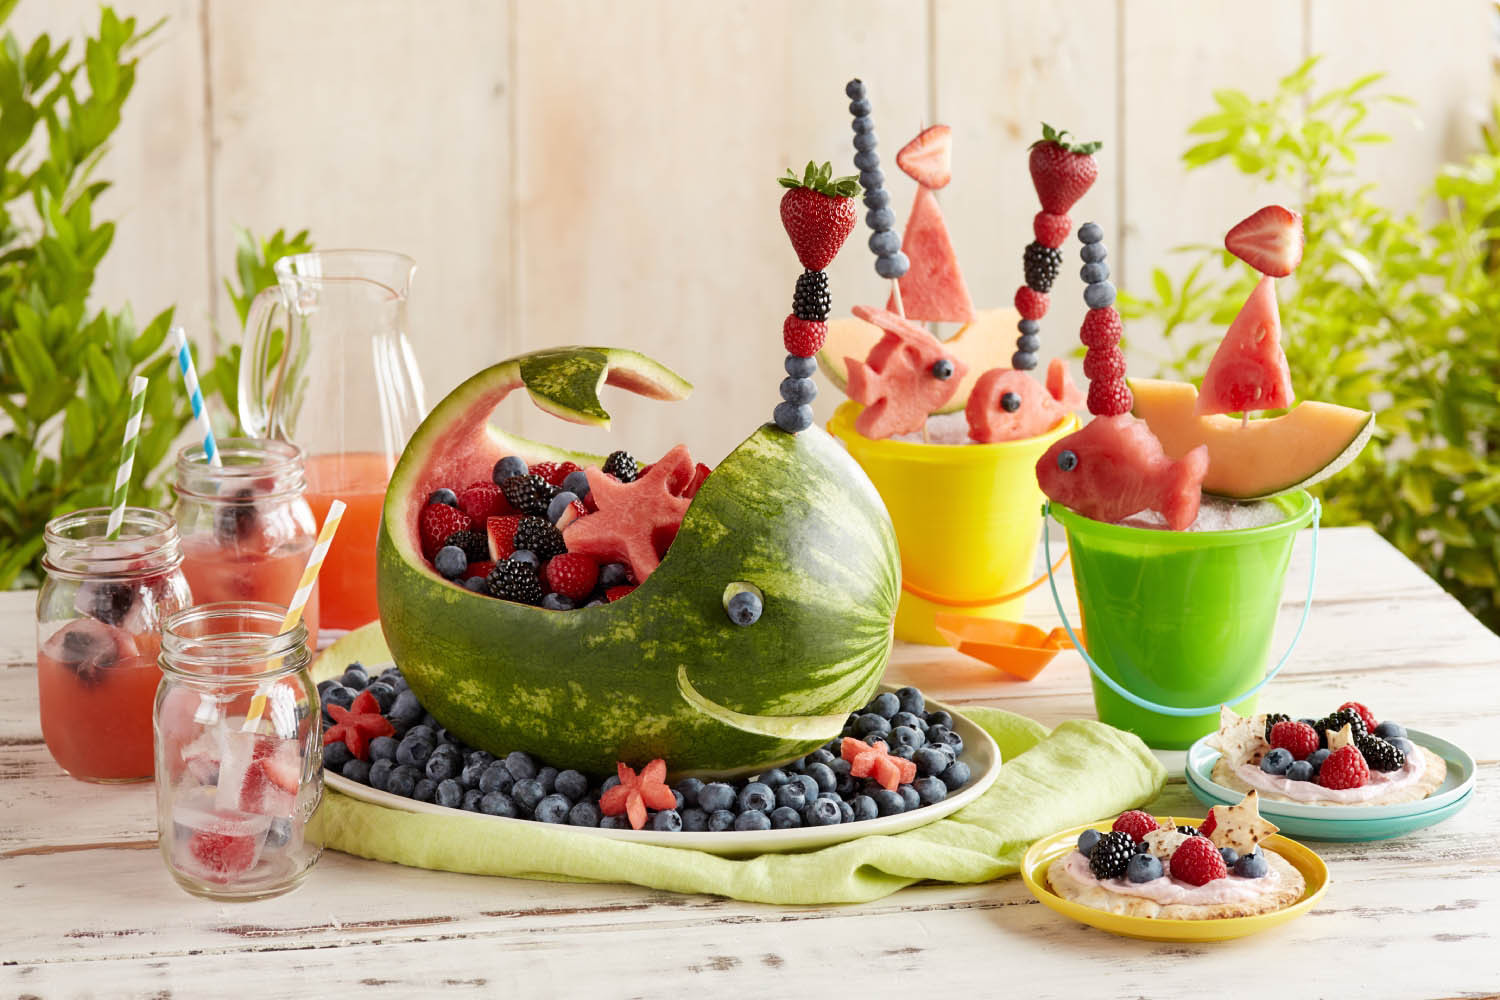 Beach Food Ideas For Party
 Splash into Summer with a Berry Beach Party